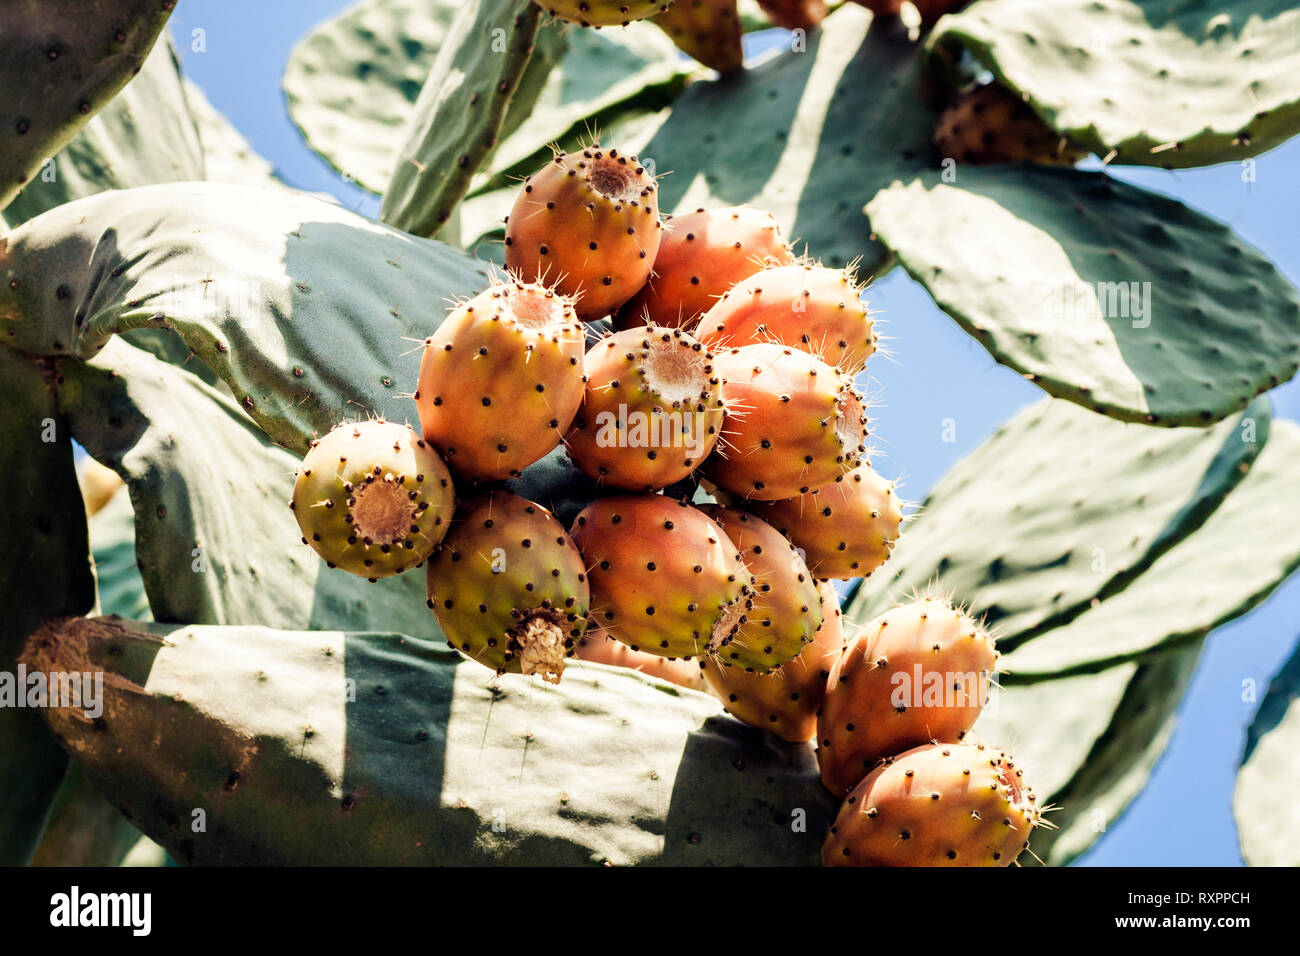 Fruits of Prickly pear cactus with fruits also known as Opuntia, ficus-indica, Indian fig opuntia in the seacoast of Taormina, Sicily, Italy Stock Photo